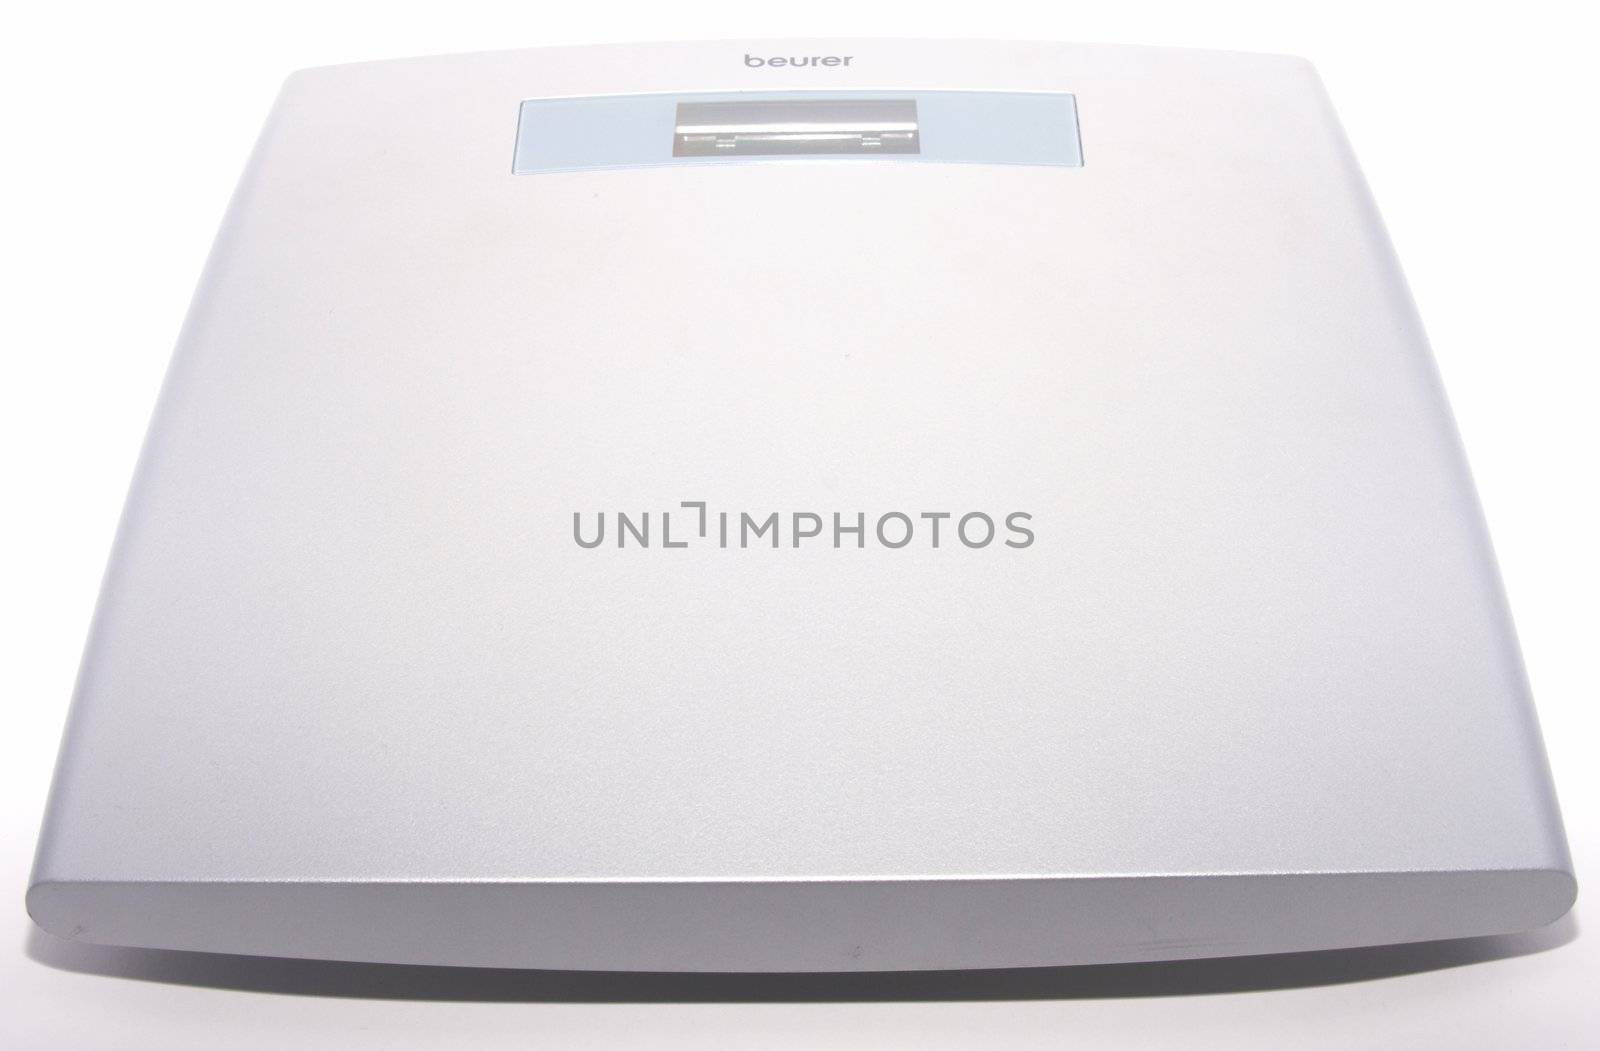 Weighing scales on white background.